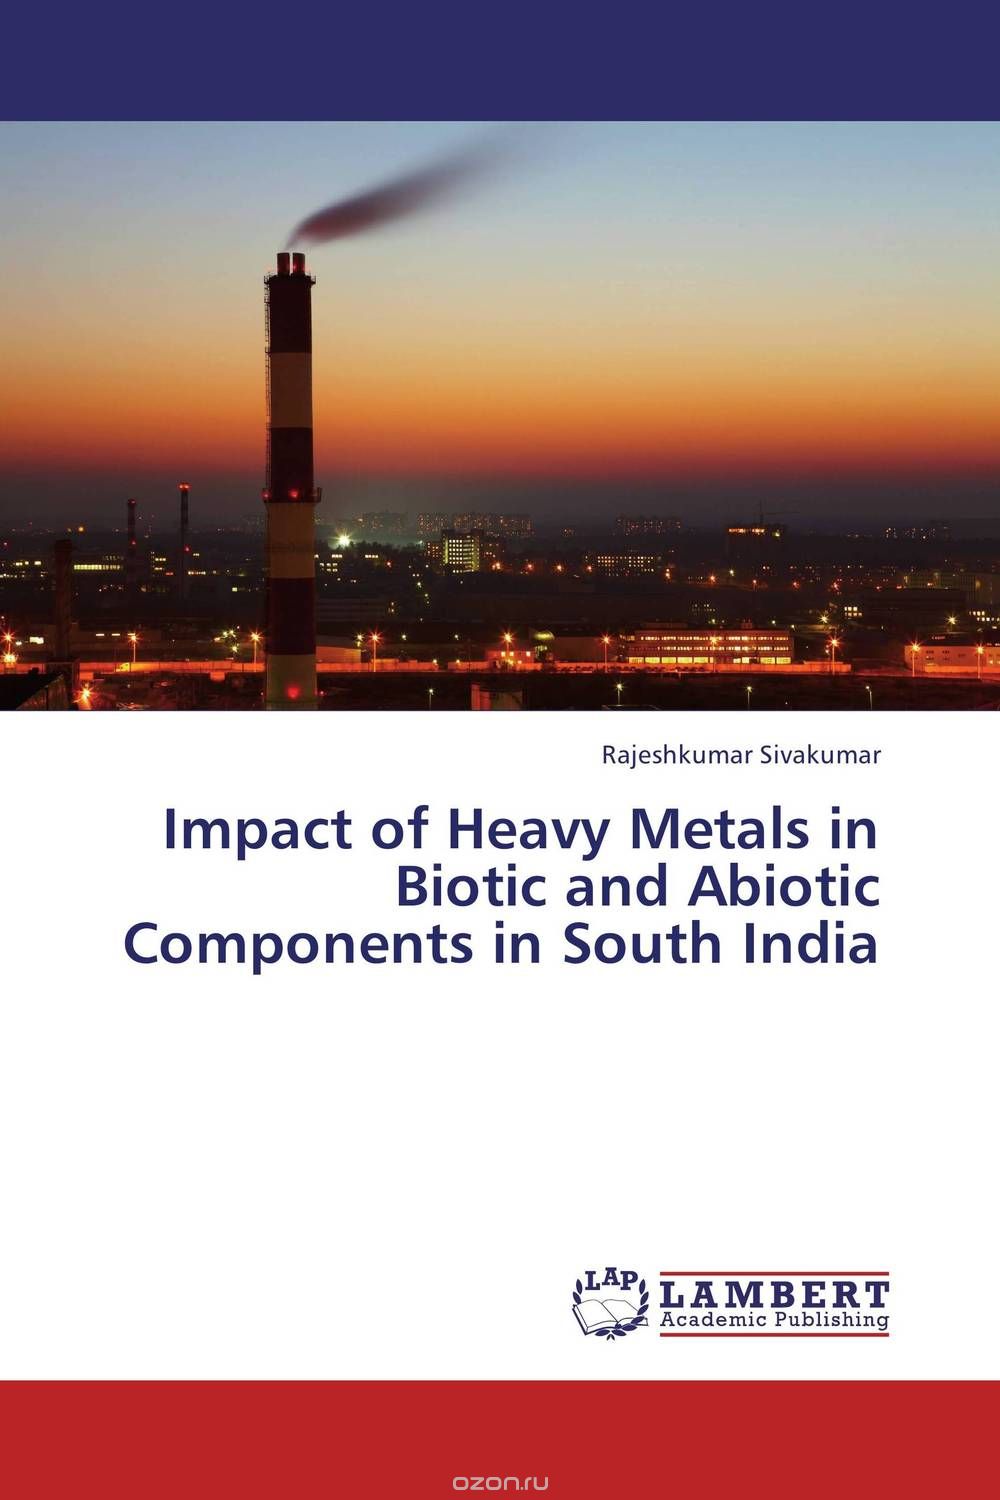 Скачать книгу "Impact of Heavy Metals in Biotic and Abiotic Components in South India"